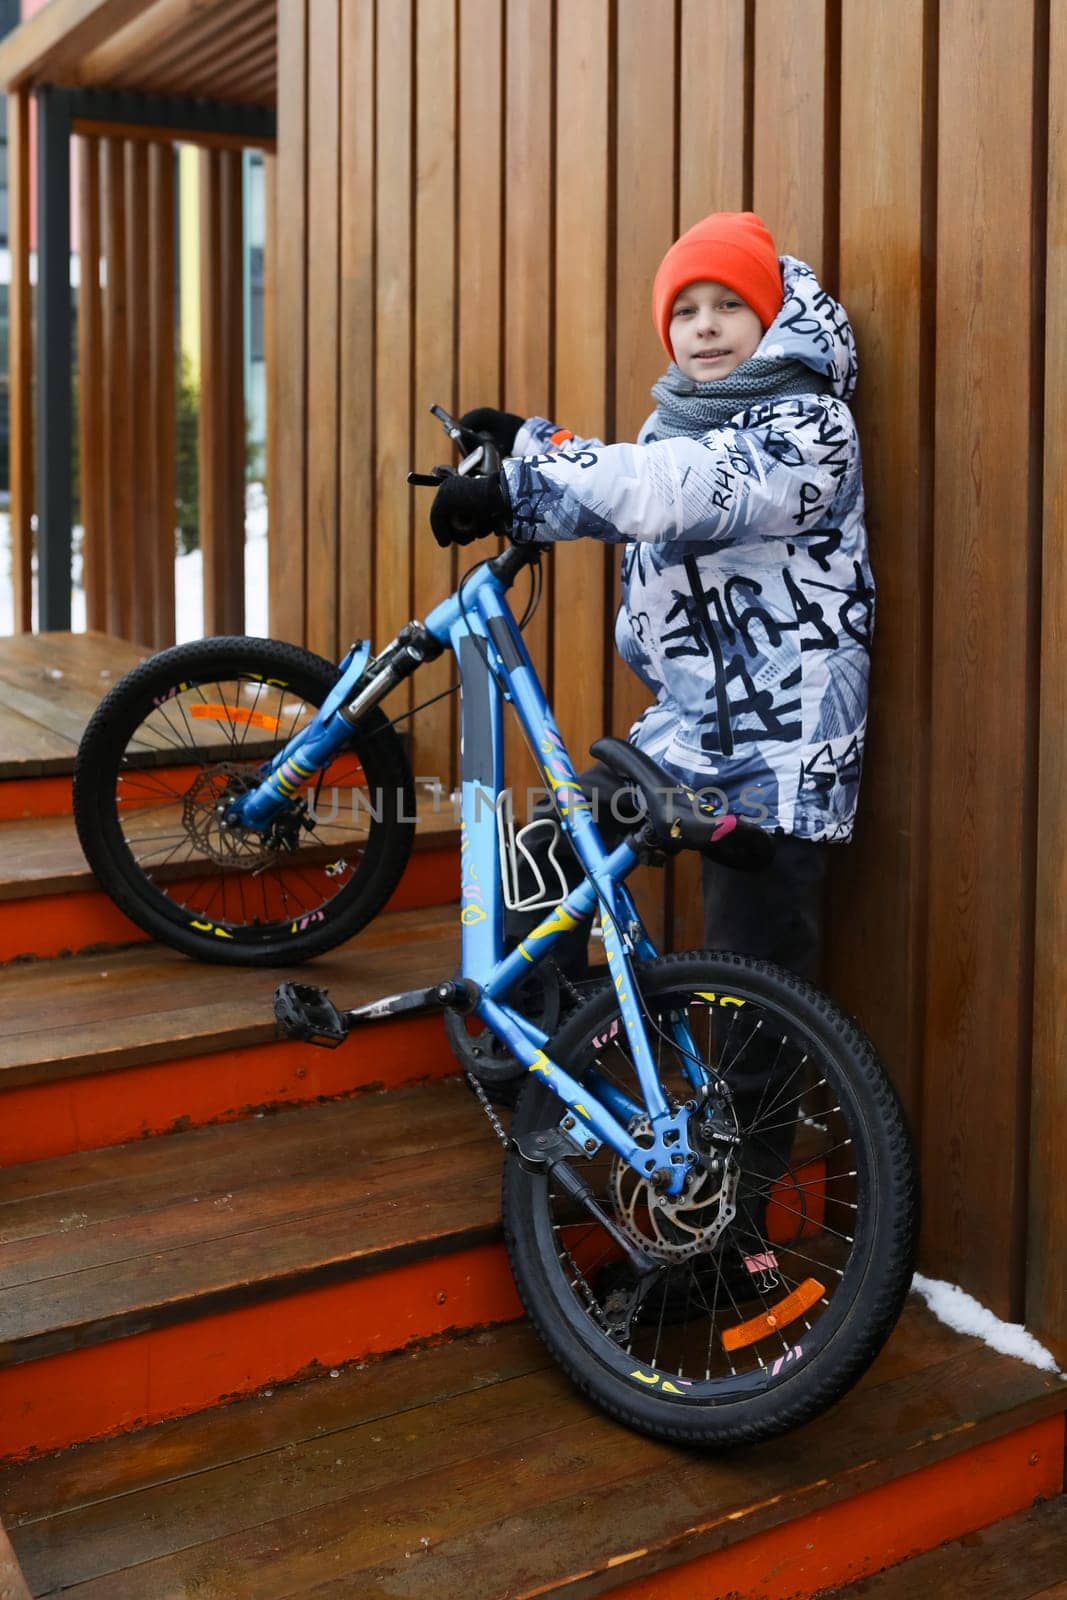 A boy in winter clothes rides a bicycle during the holidays.